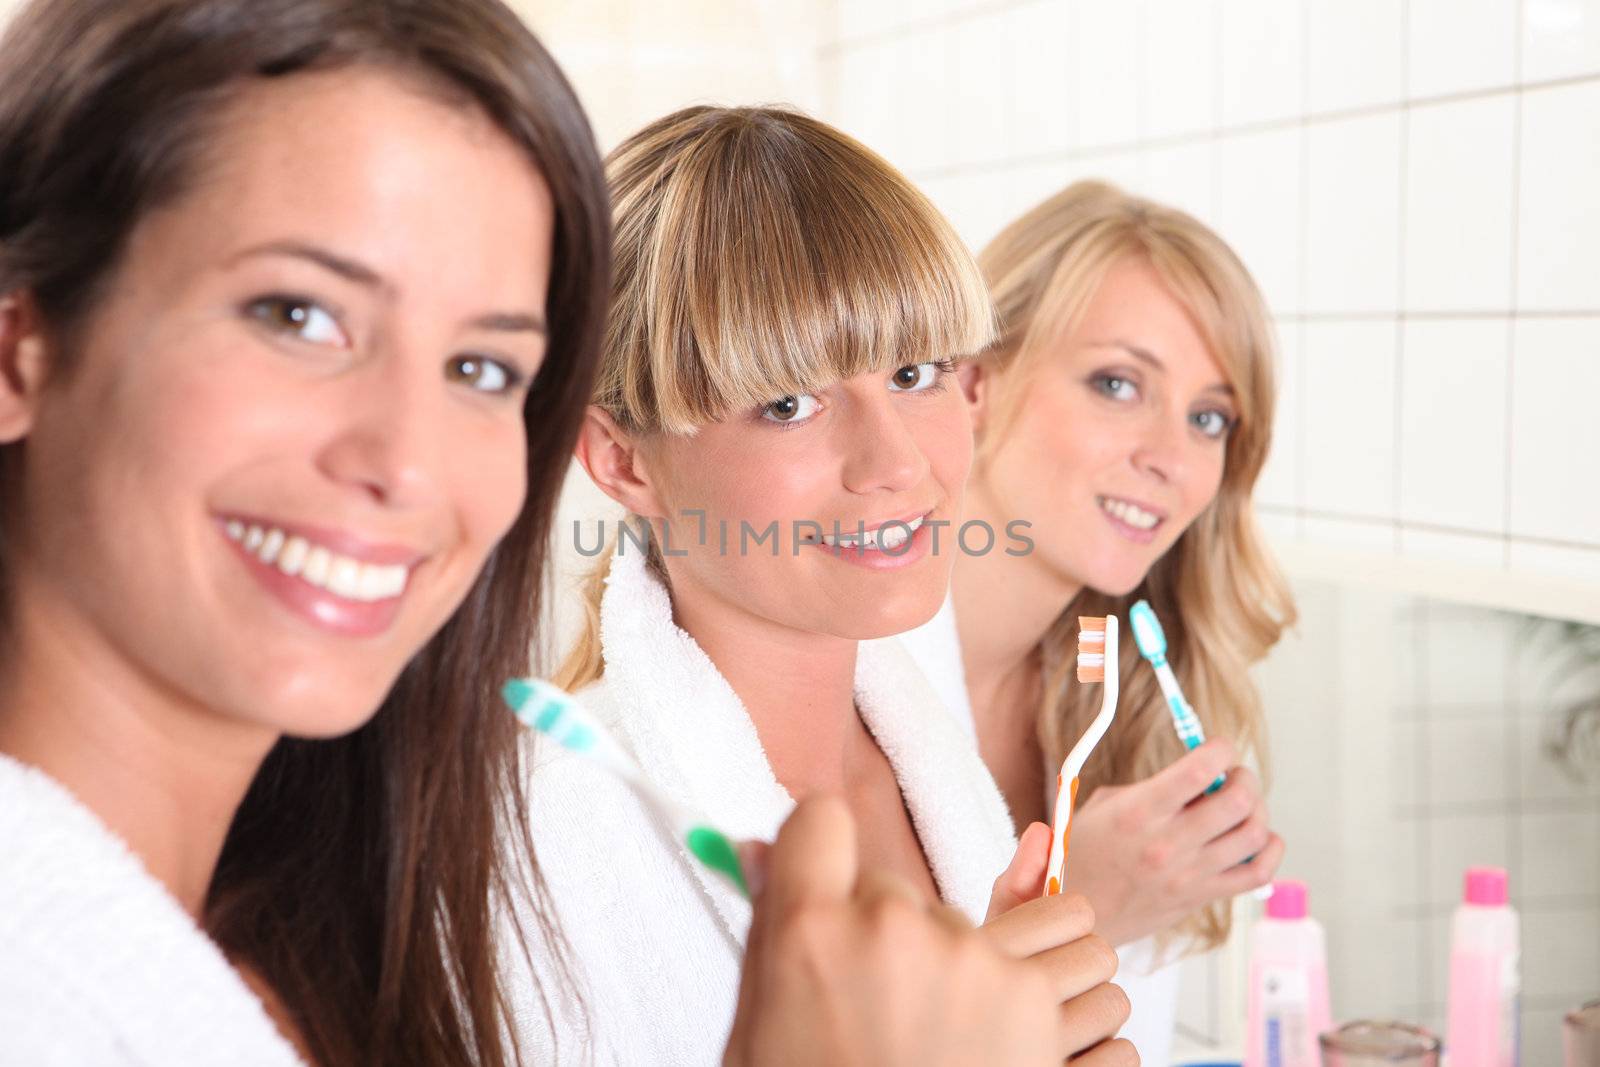 Young woman in the bathroom together